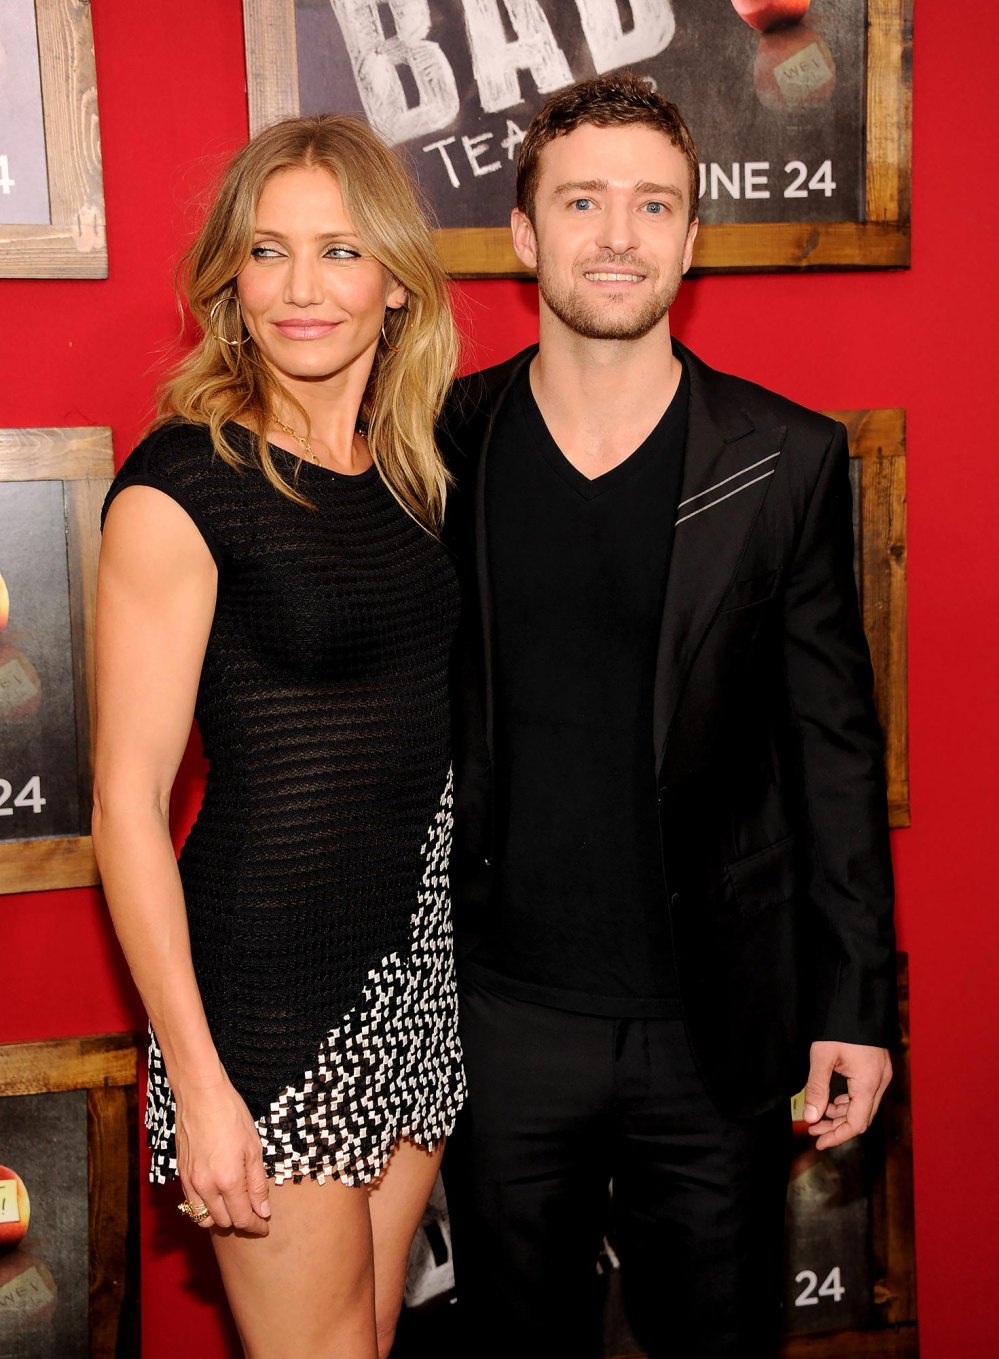 Justin Timberlake Allegedly Cheated on Cameron Diaz With Playboy Model